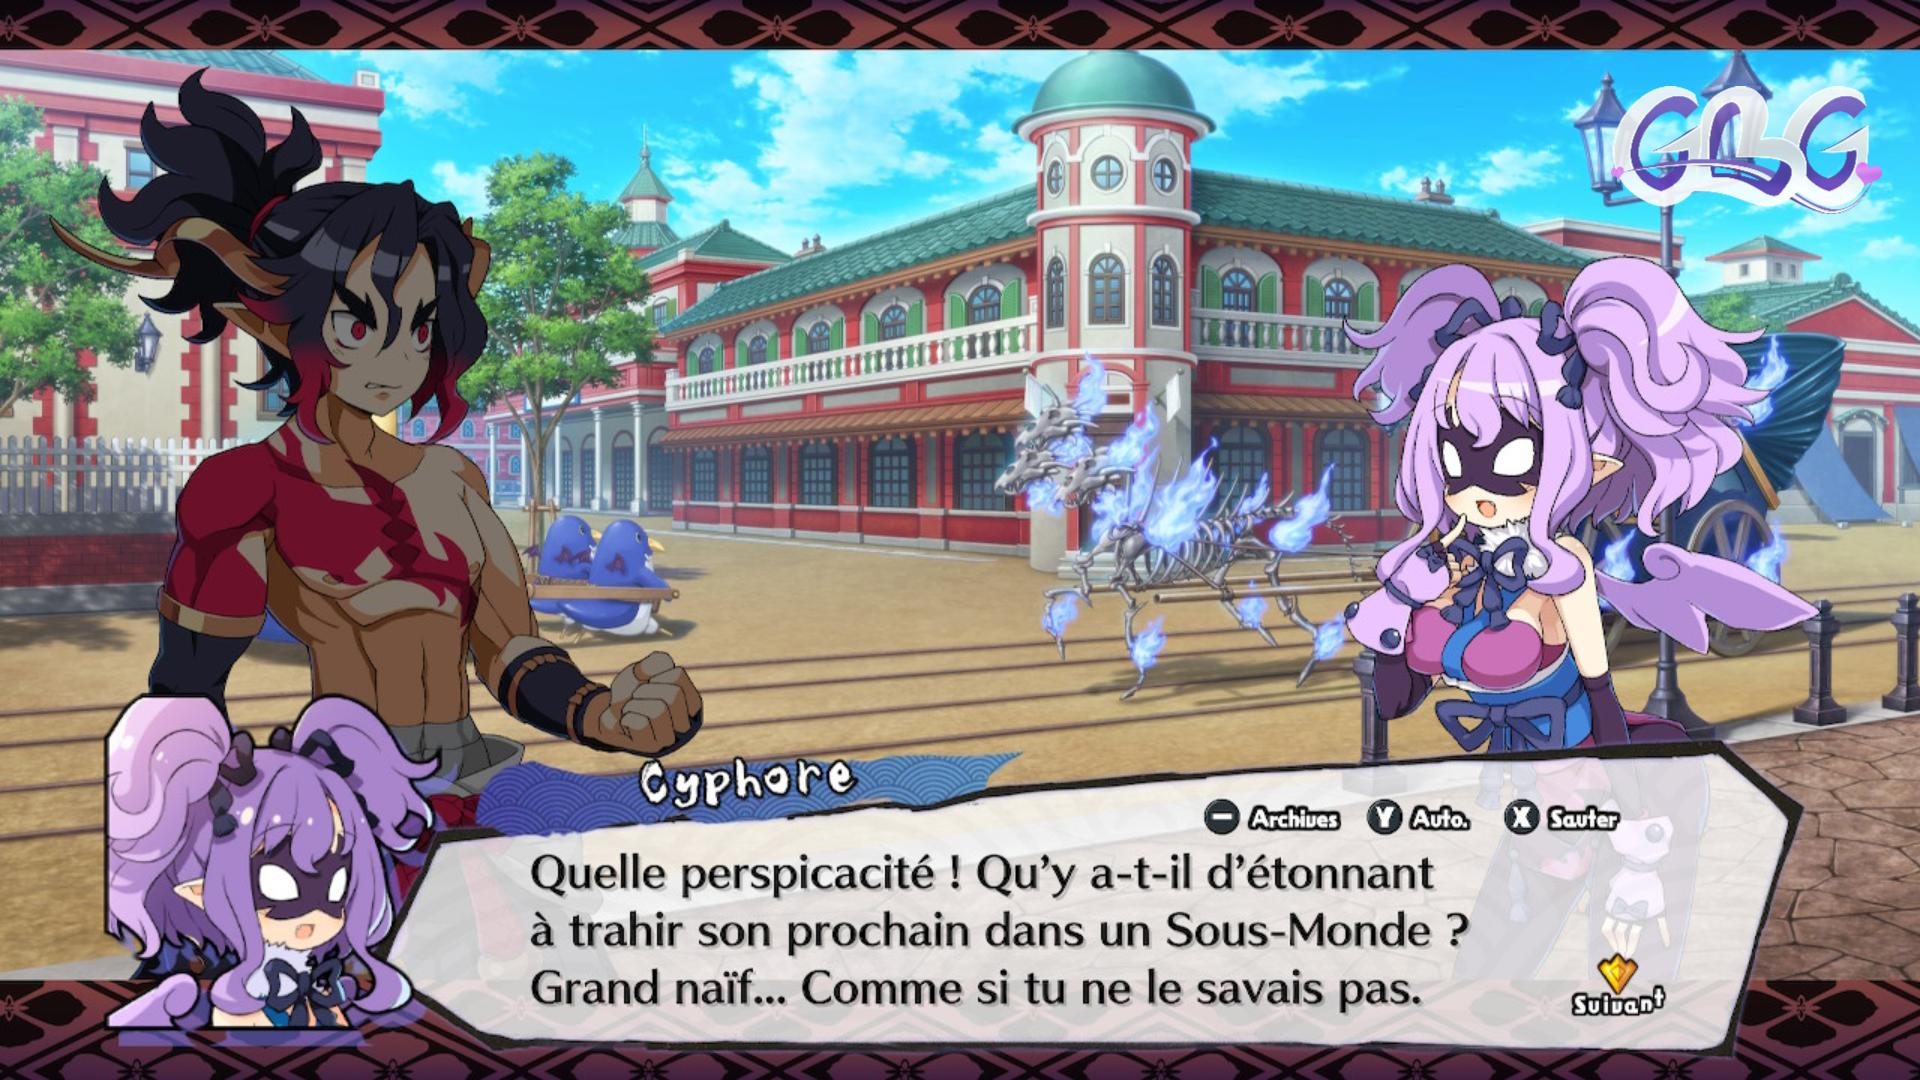 Cyphore - Disgaea 7 : Vows of the Virtueless